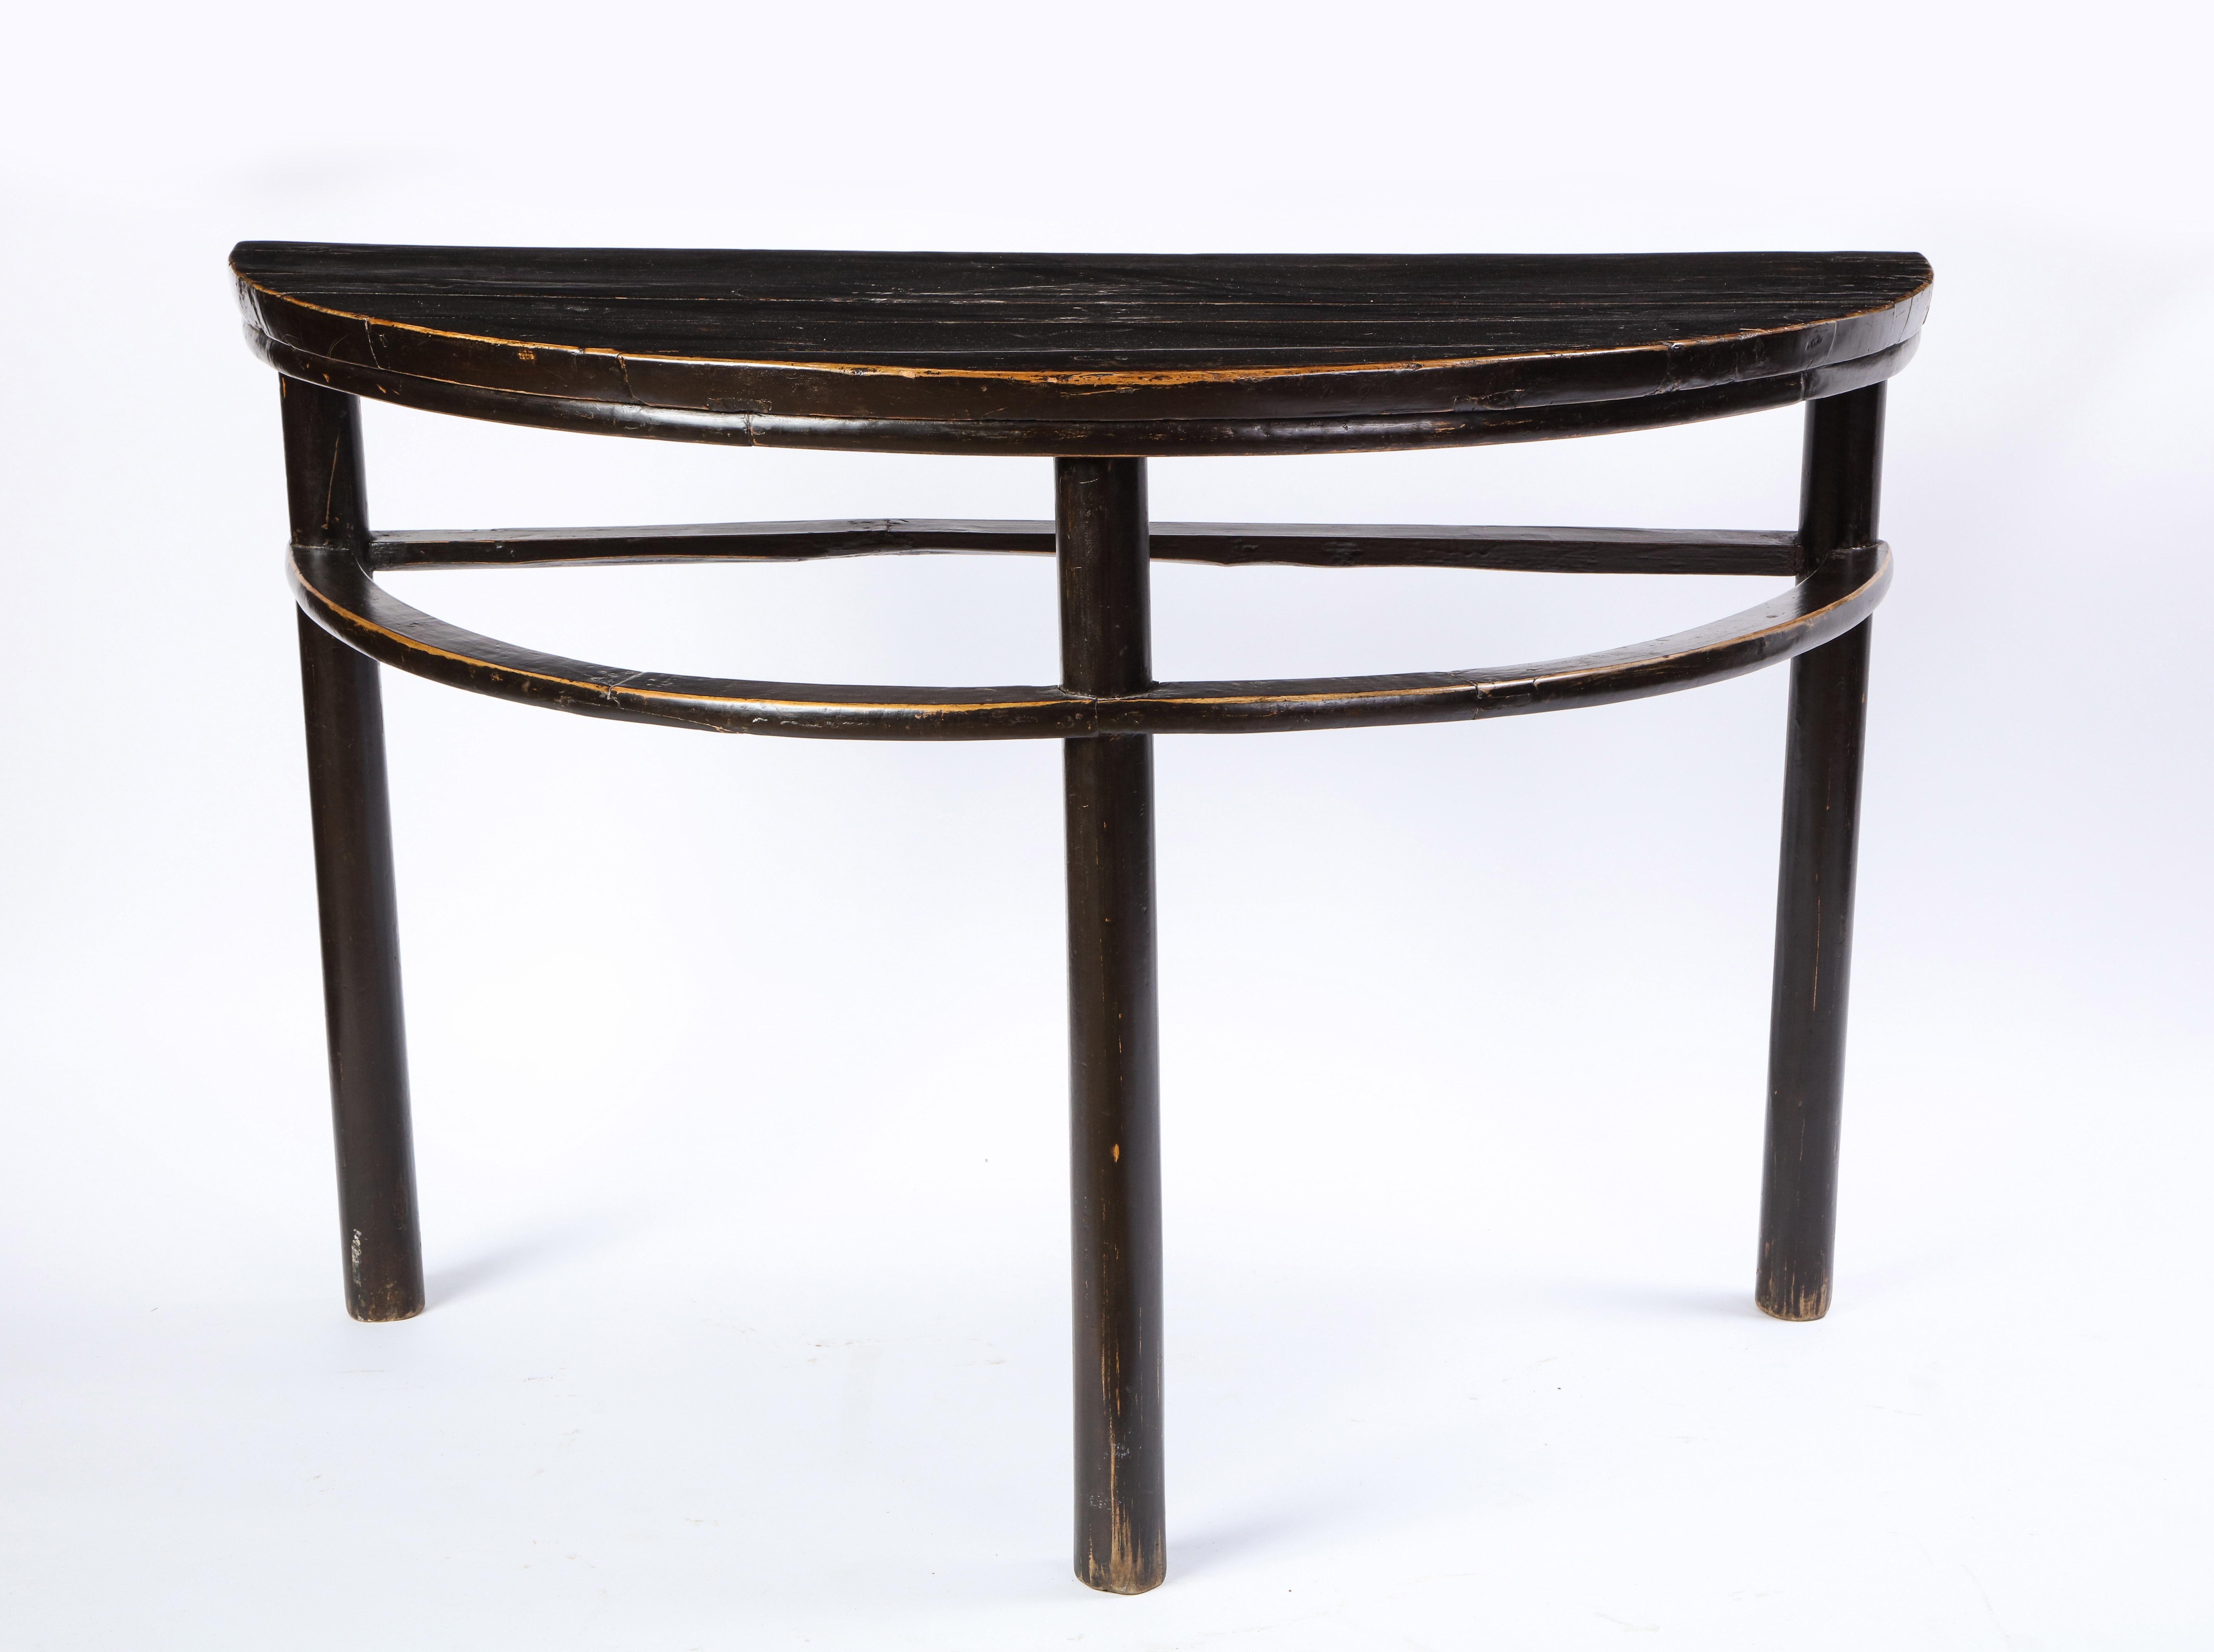 A pair of Chinese stained soft wood demilune side tables, 20th century. Demilune, French for 'half-moon,' tables often appear flanking a fireplace or in an entryway, where the flat back allows for the tables to sit flush on the wall while the curved